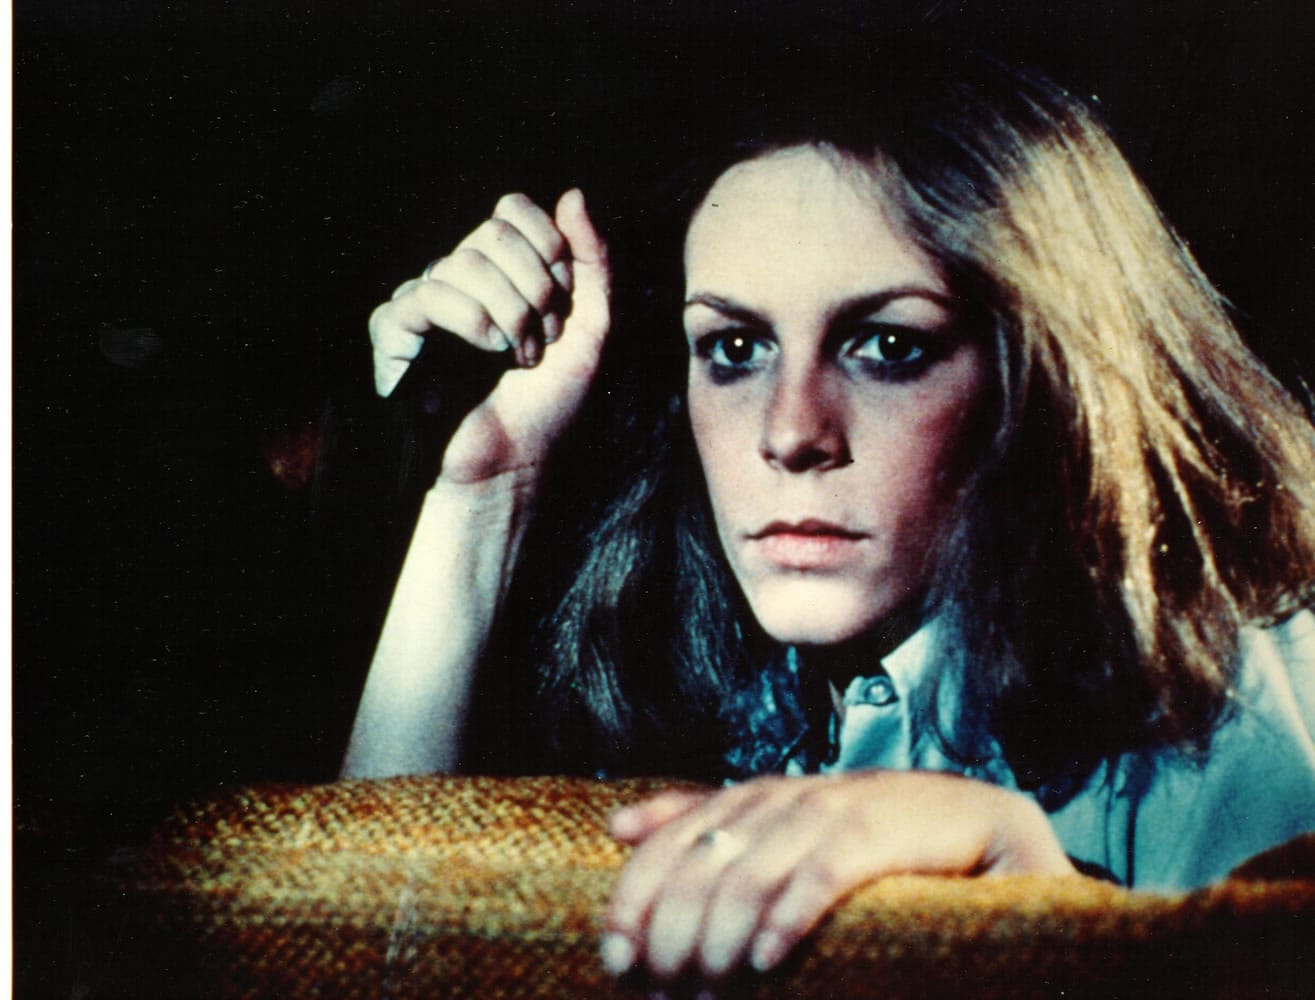 Actress Jamie Lee Curtis appears the 1978 horror film classic "Halloween" directed by John Carpenter.